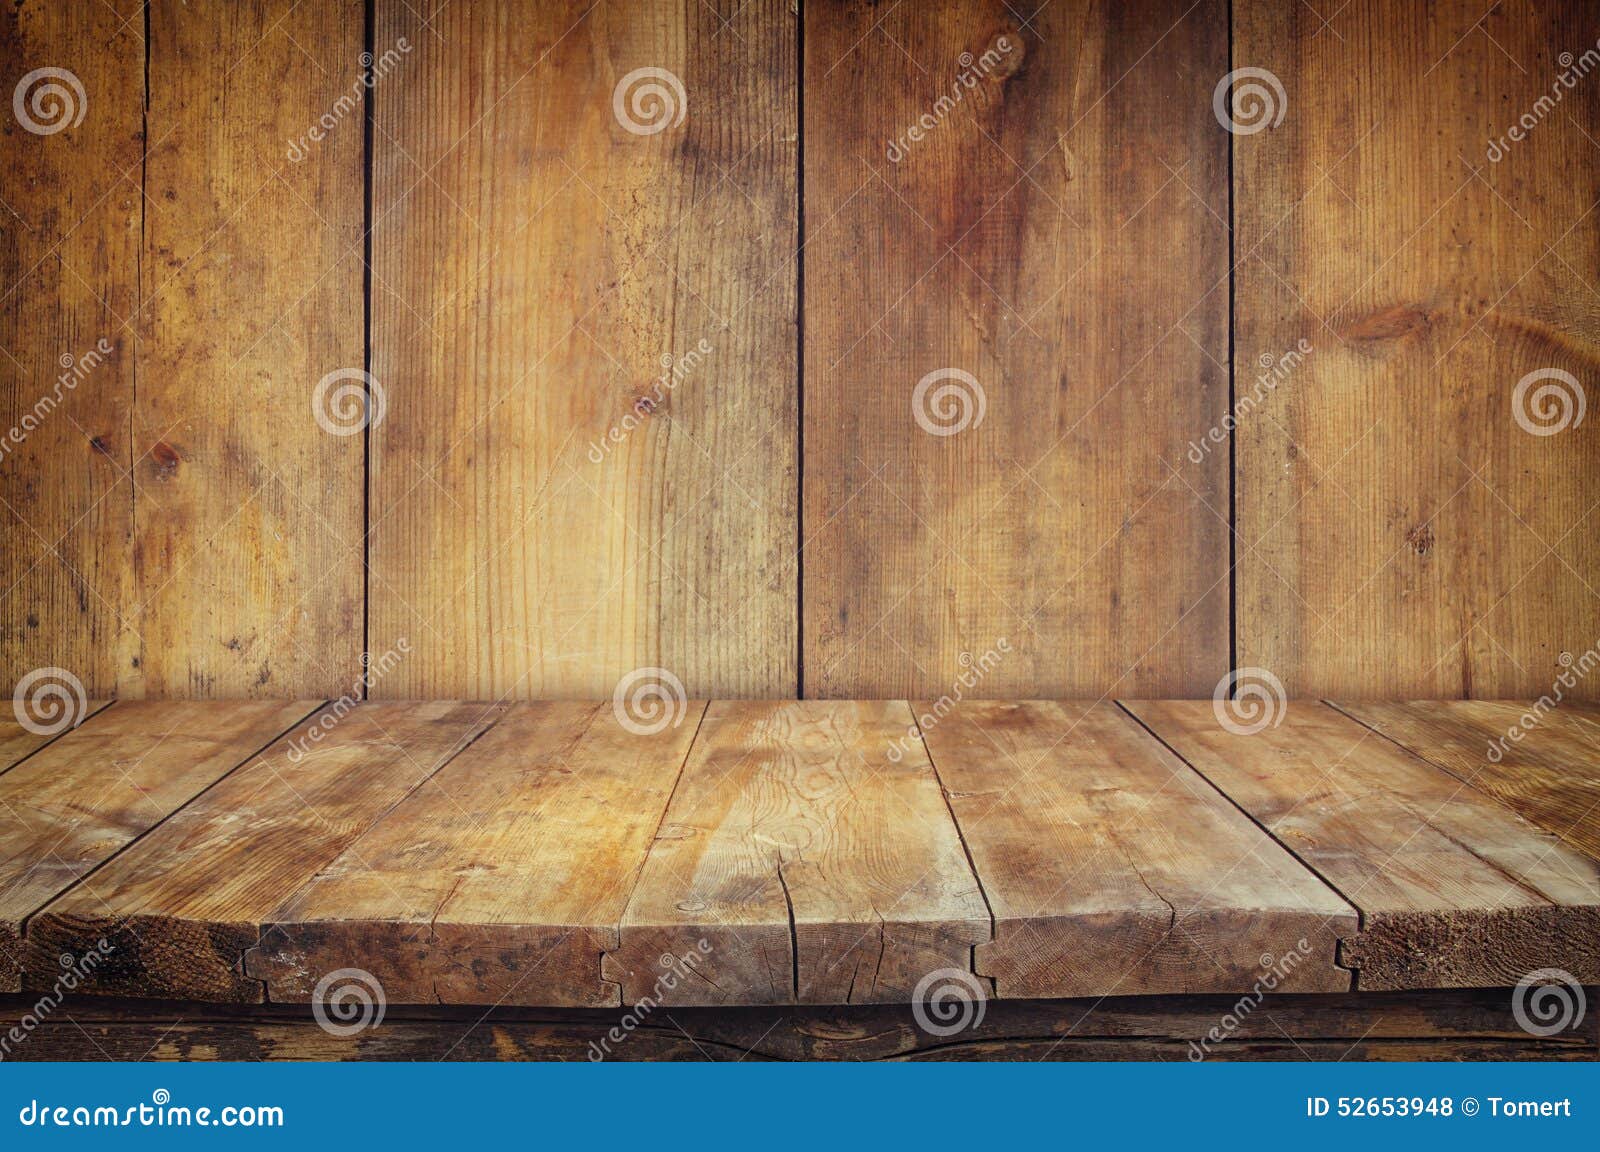 https://thumbs.dreamstime.com/z/grunge-vintage-wooden-board-table-front-old-wooden-background-ready-product-display-montages-52653948.jpg